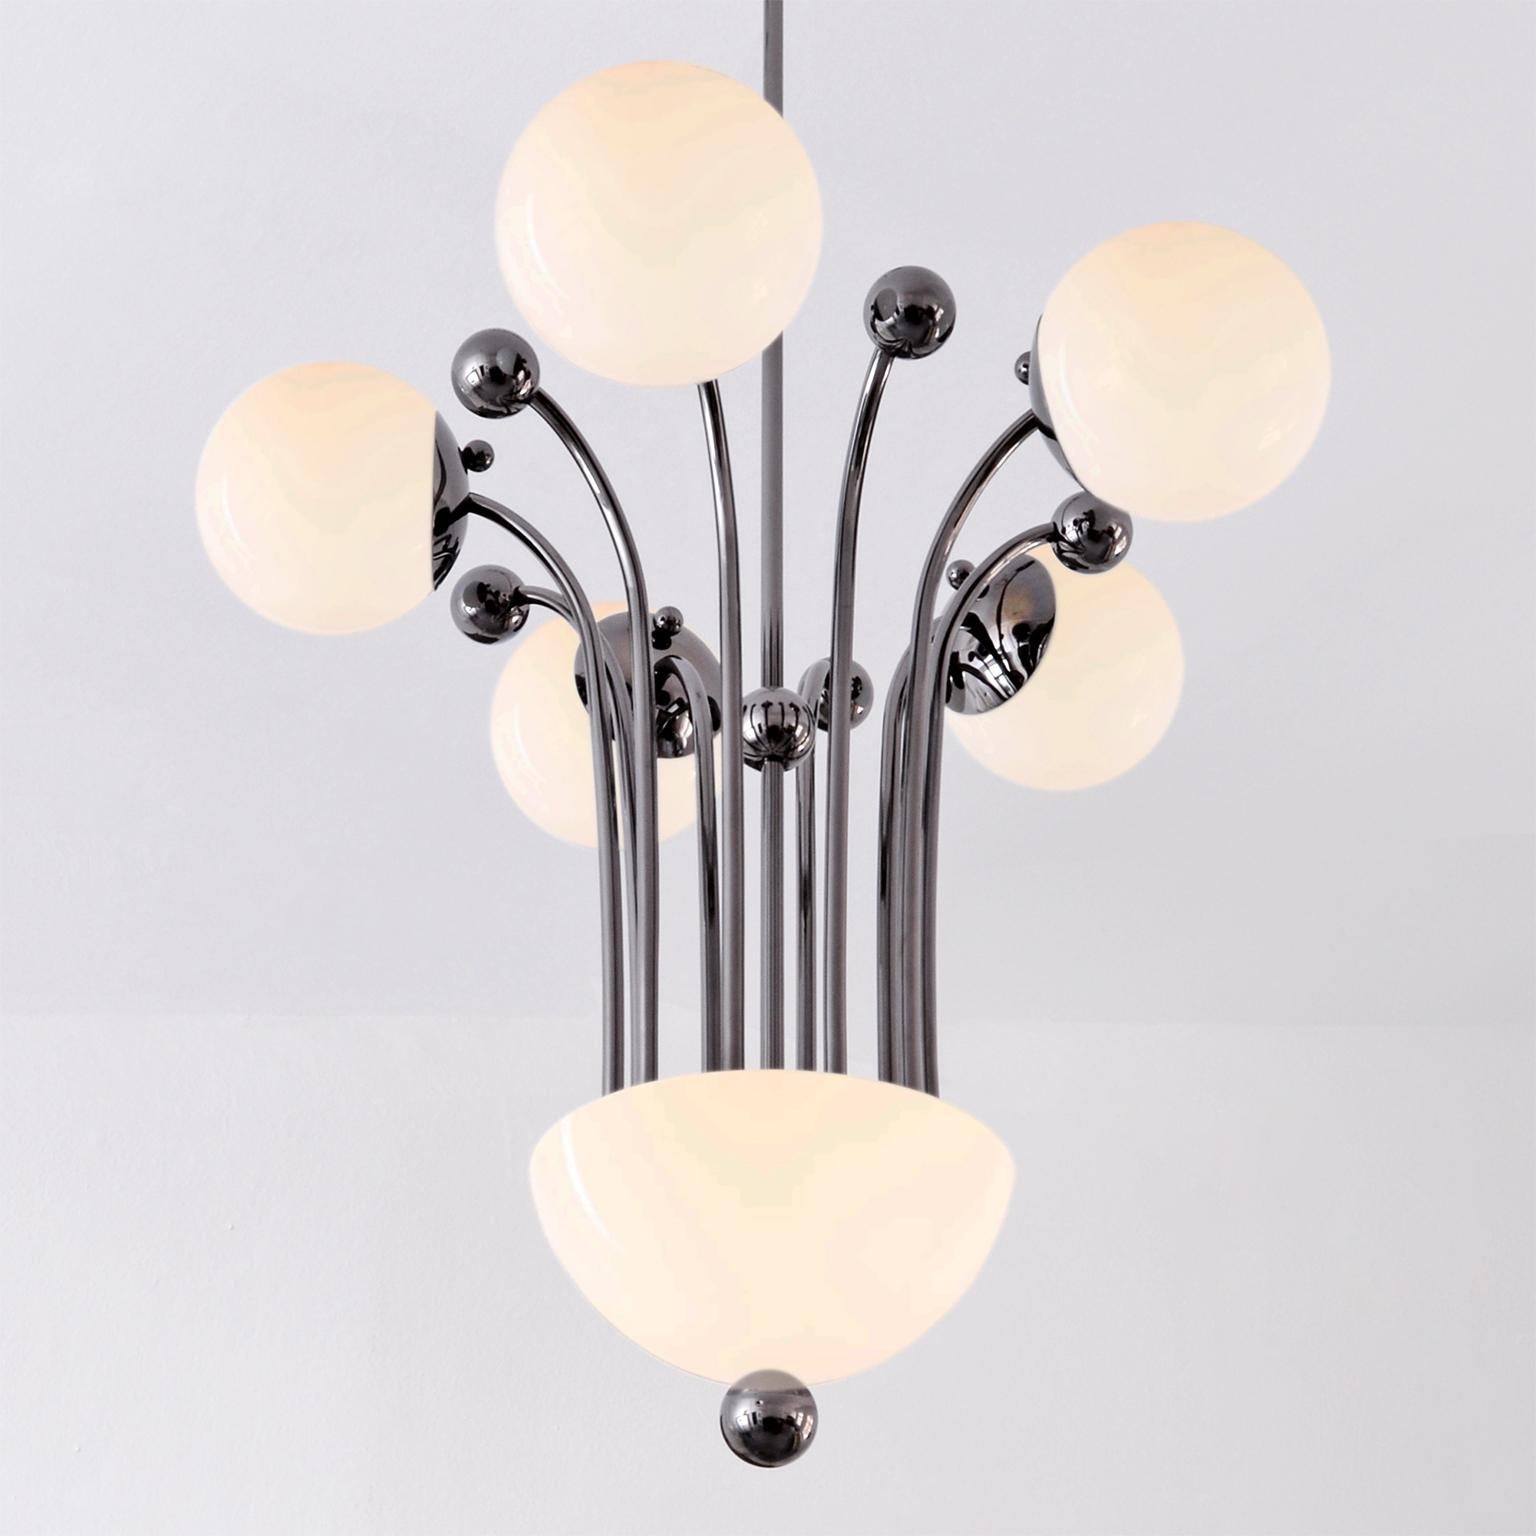 Modernist ceiling lamp with 6 lights made of plated brass with opal glass balls, bespoke.